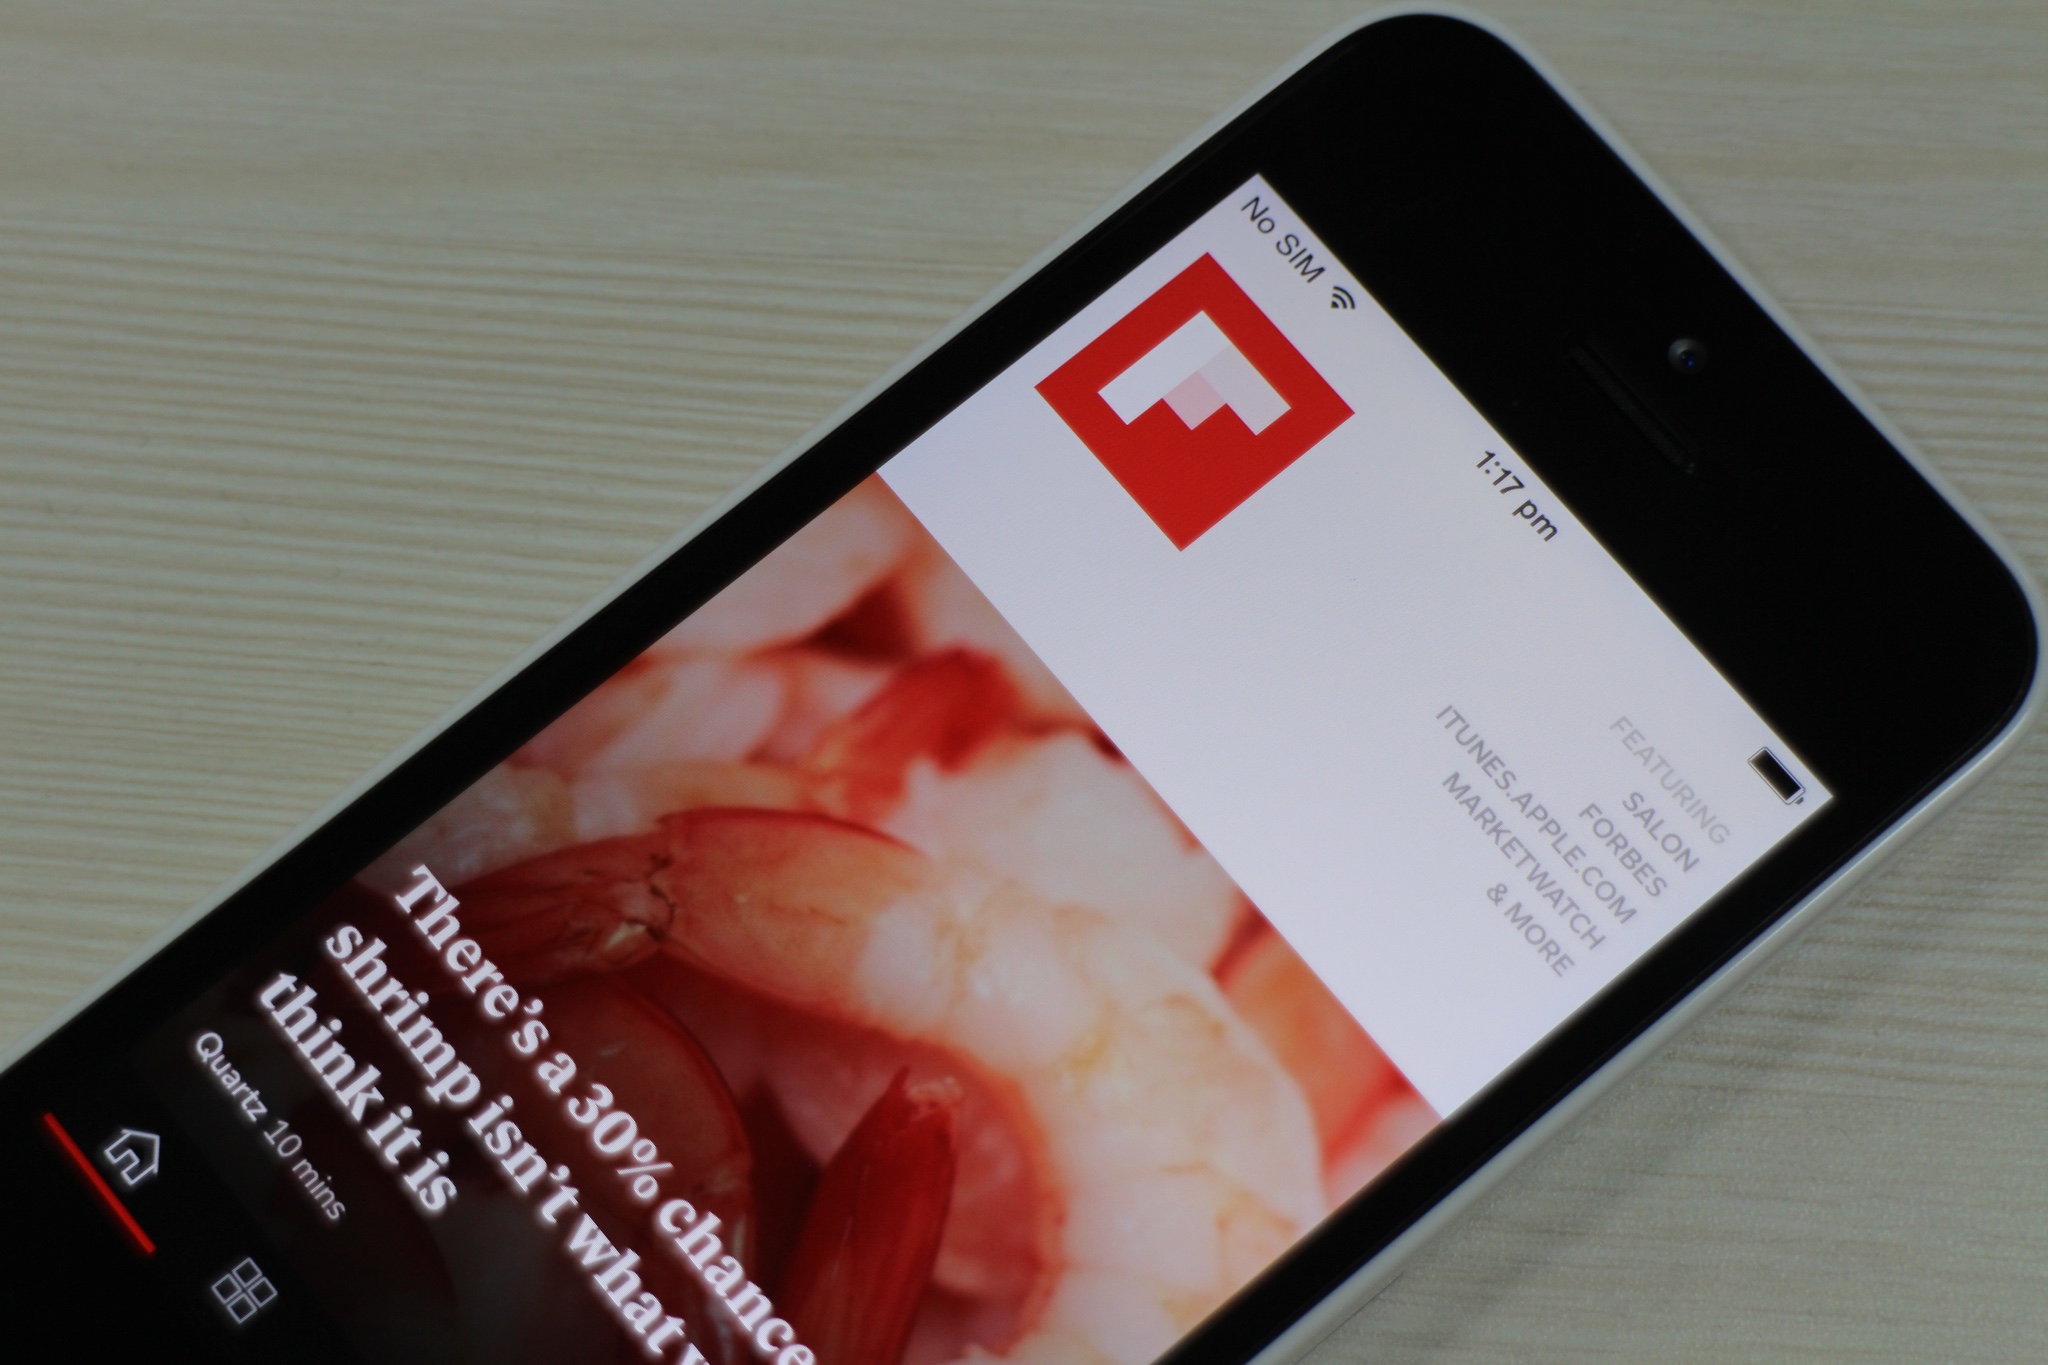 Flipboard resets passwords after data breach exposed users' details